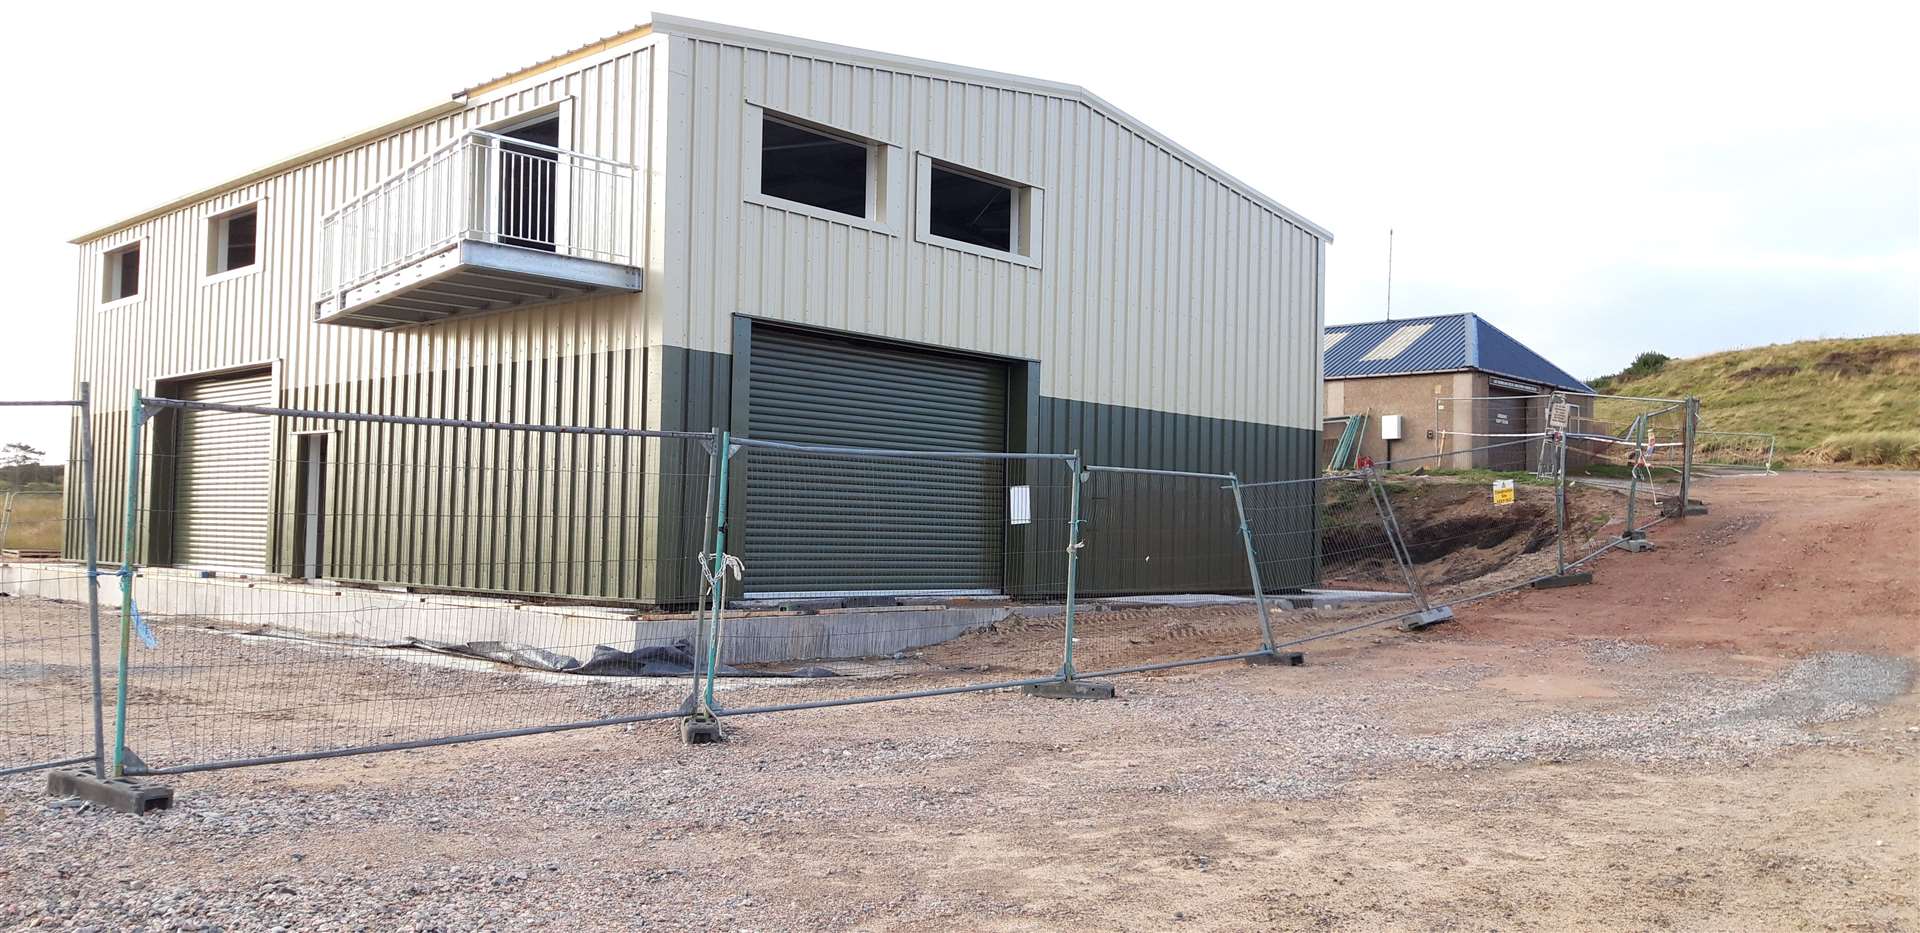 A new rescue centre is under construction next to the old boat shed.